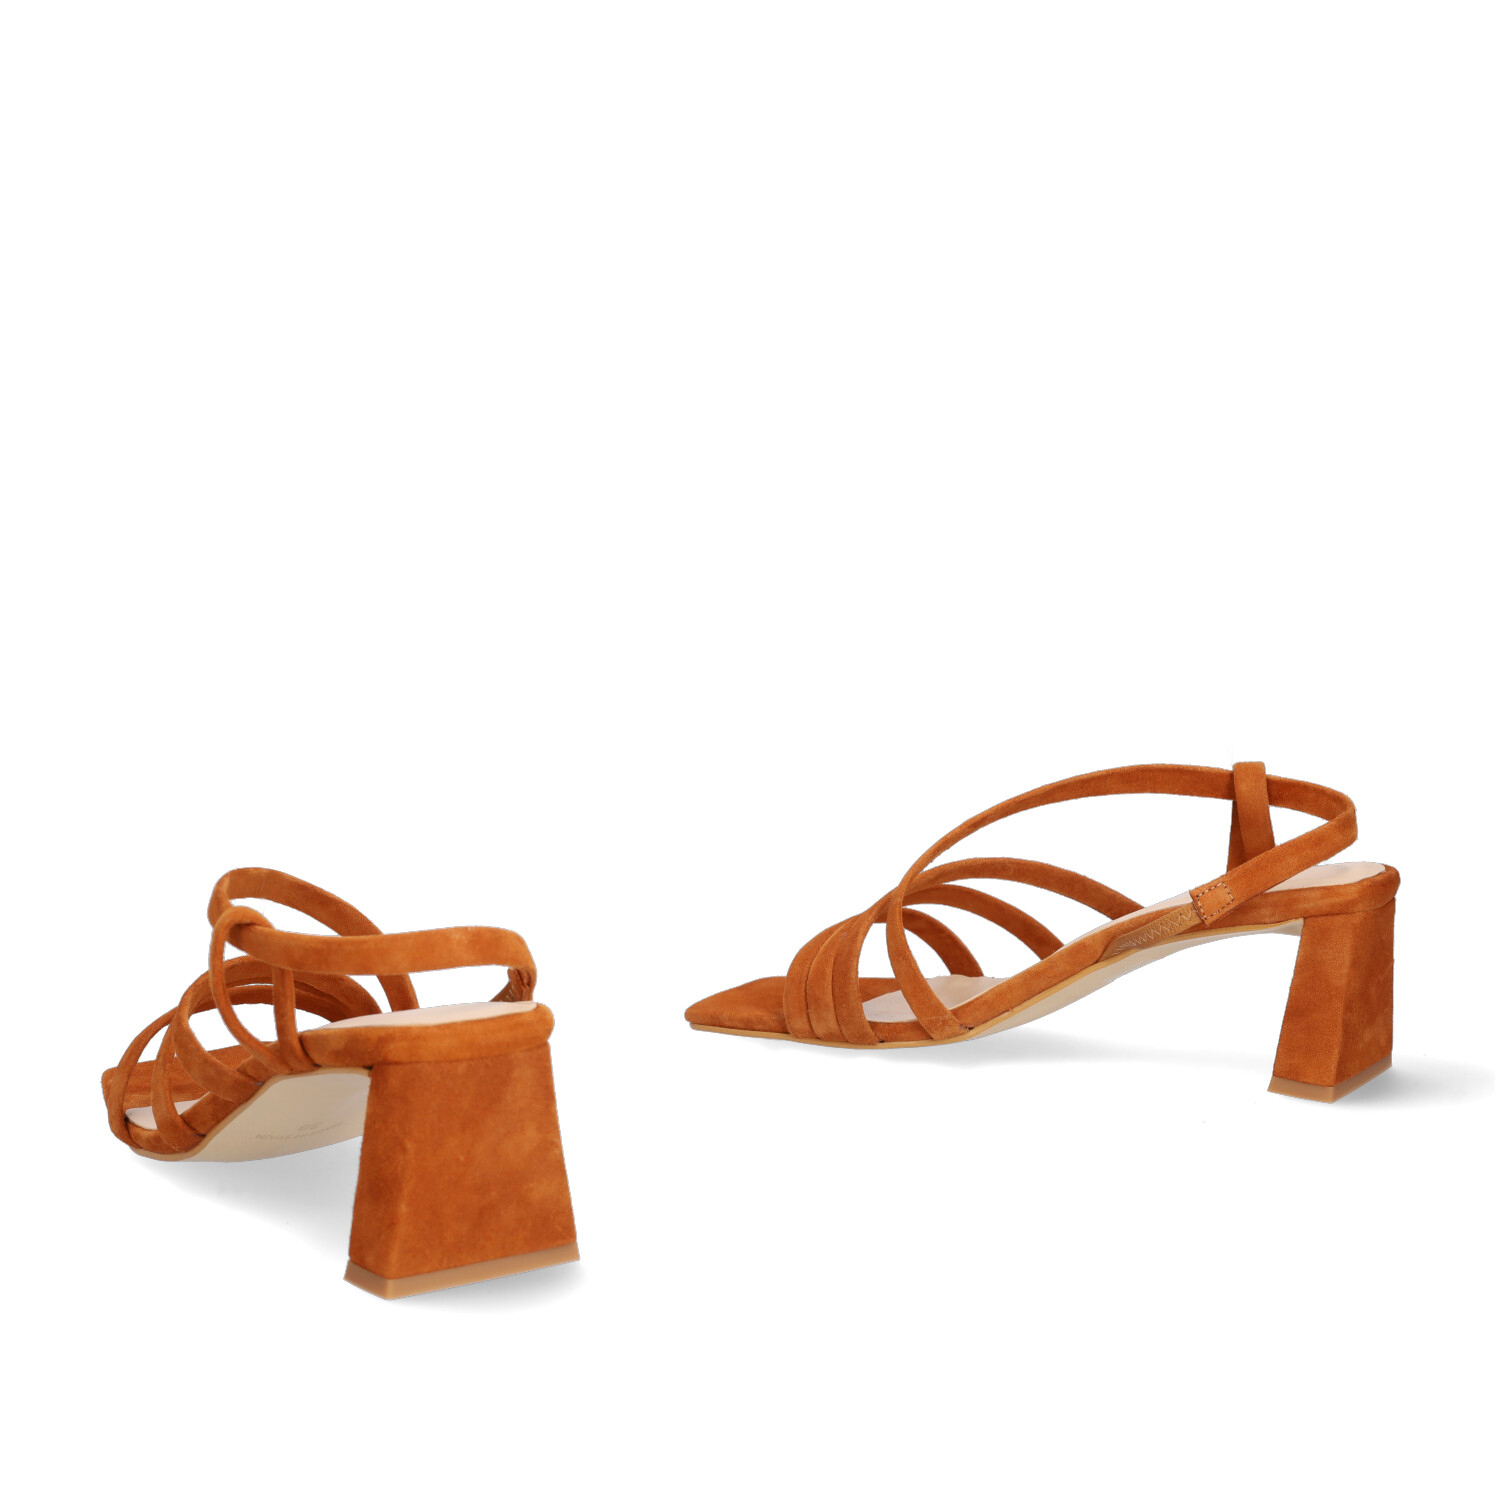 Strapped Sandals in Brown Split Leather and Square Toe 